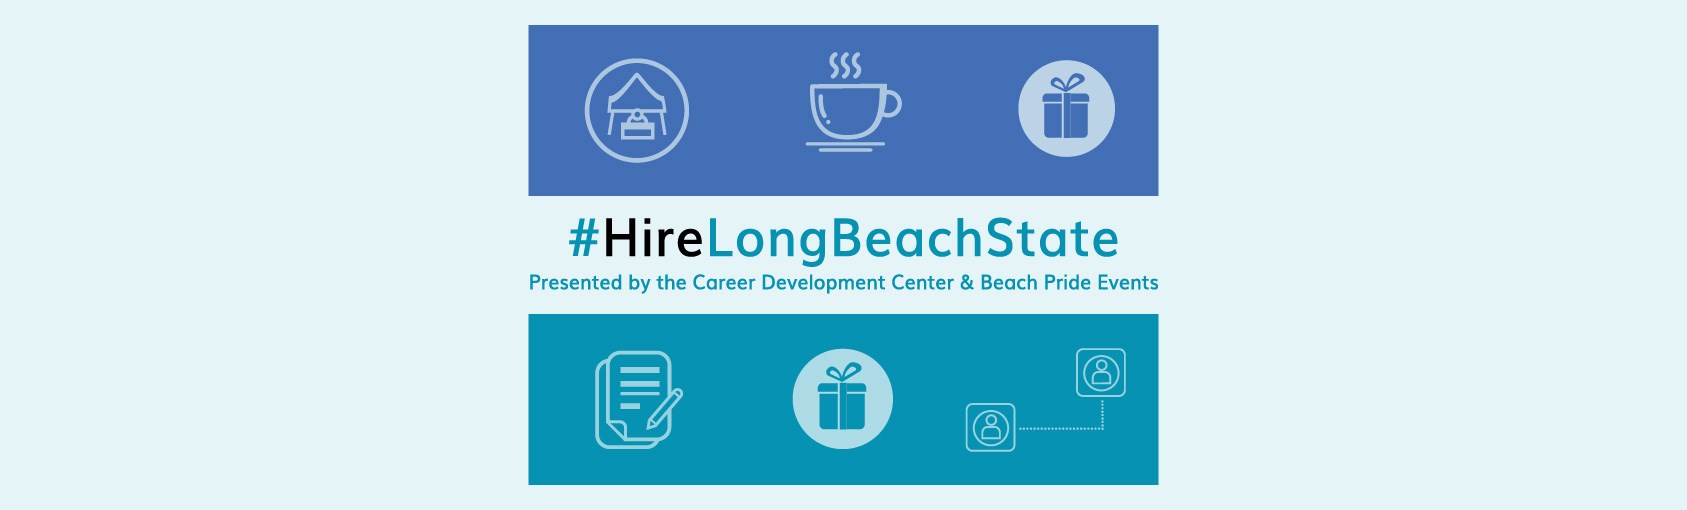 Hire Long Beach State banner